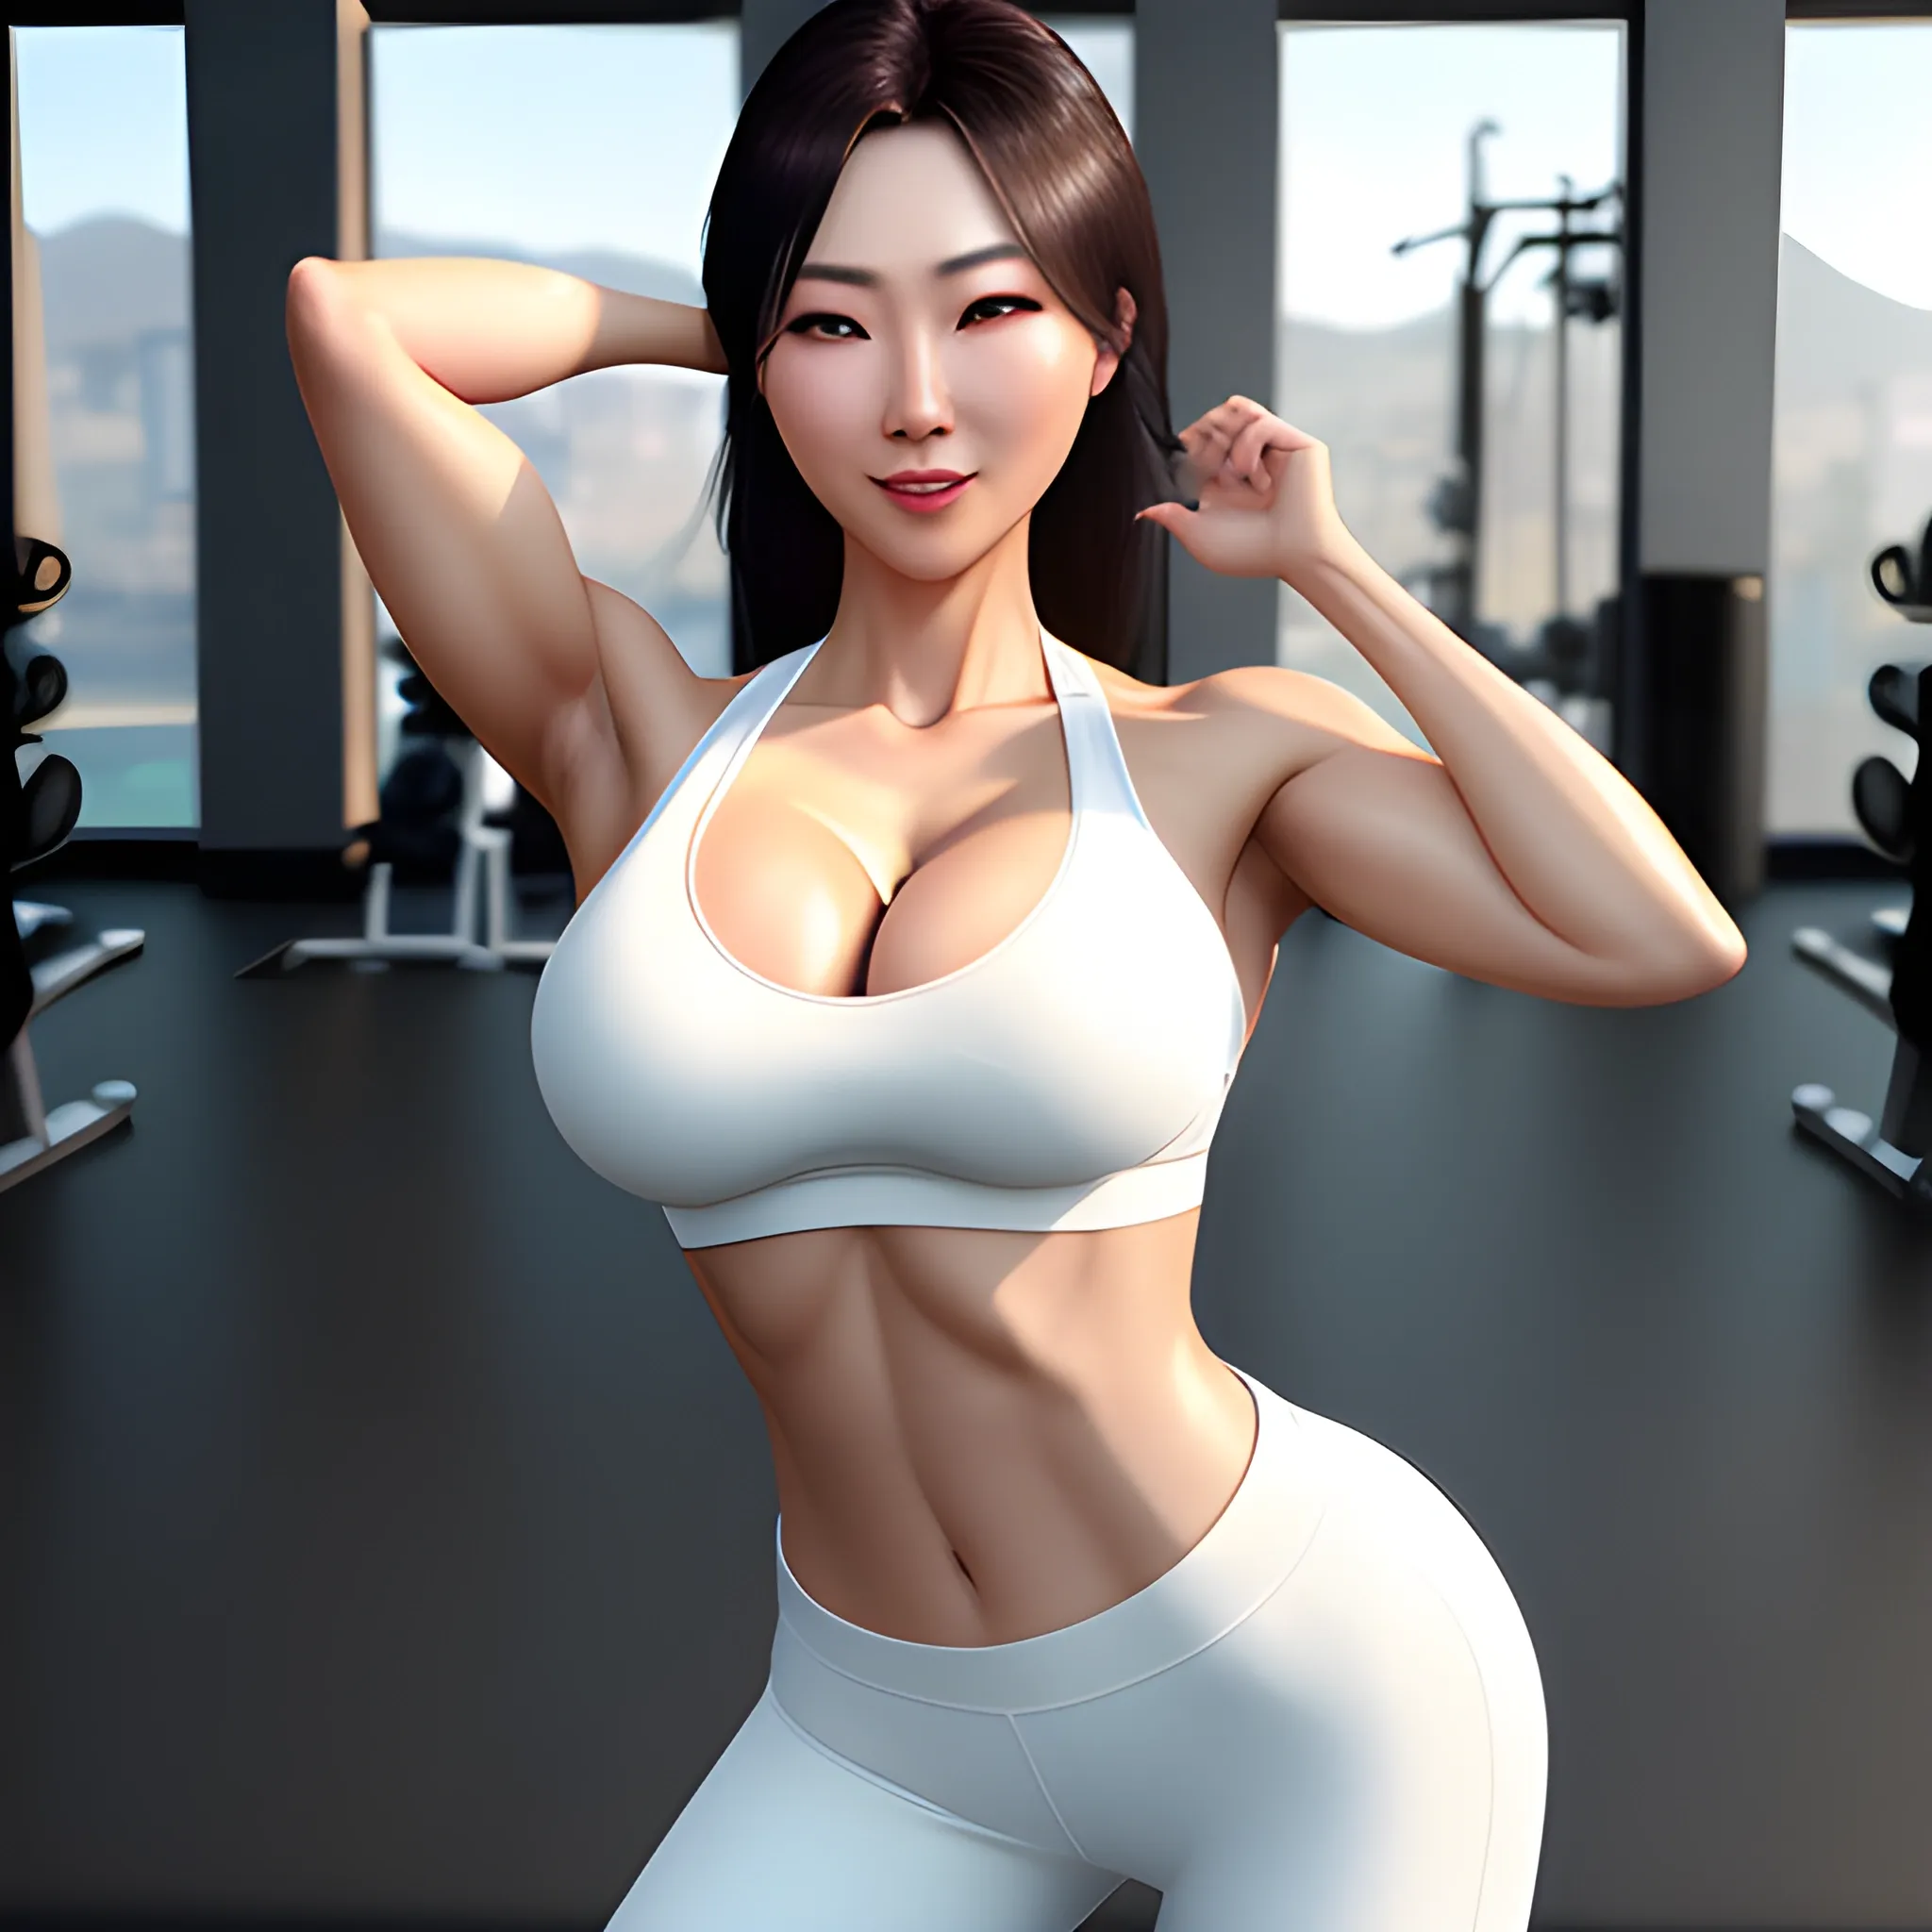 Raw Photo Photo Of A Korean Beauty Girl With Big Breasts And Ha